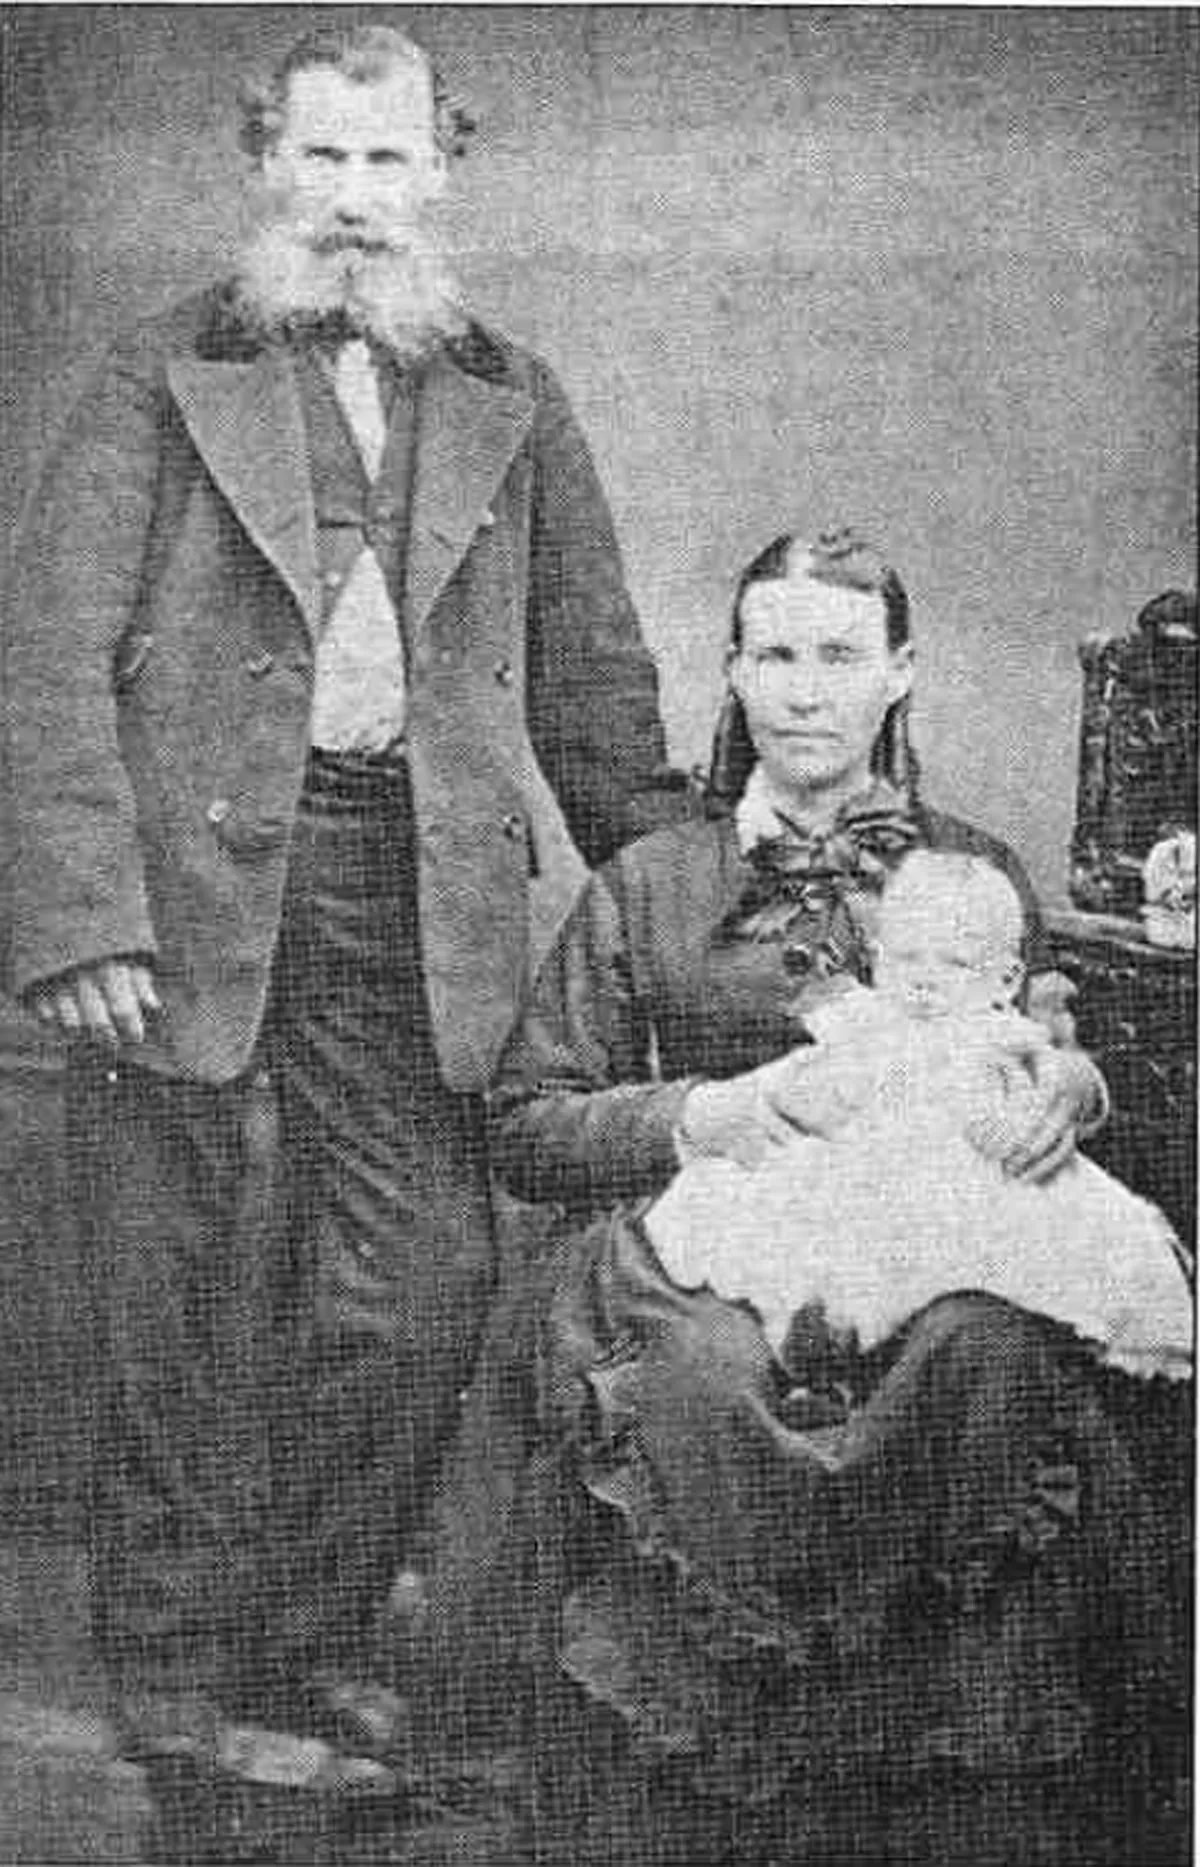 Lesley Manville's 3x great grandfather Aaron Harding with his partner Sarah on Who Do You Think You Are?